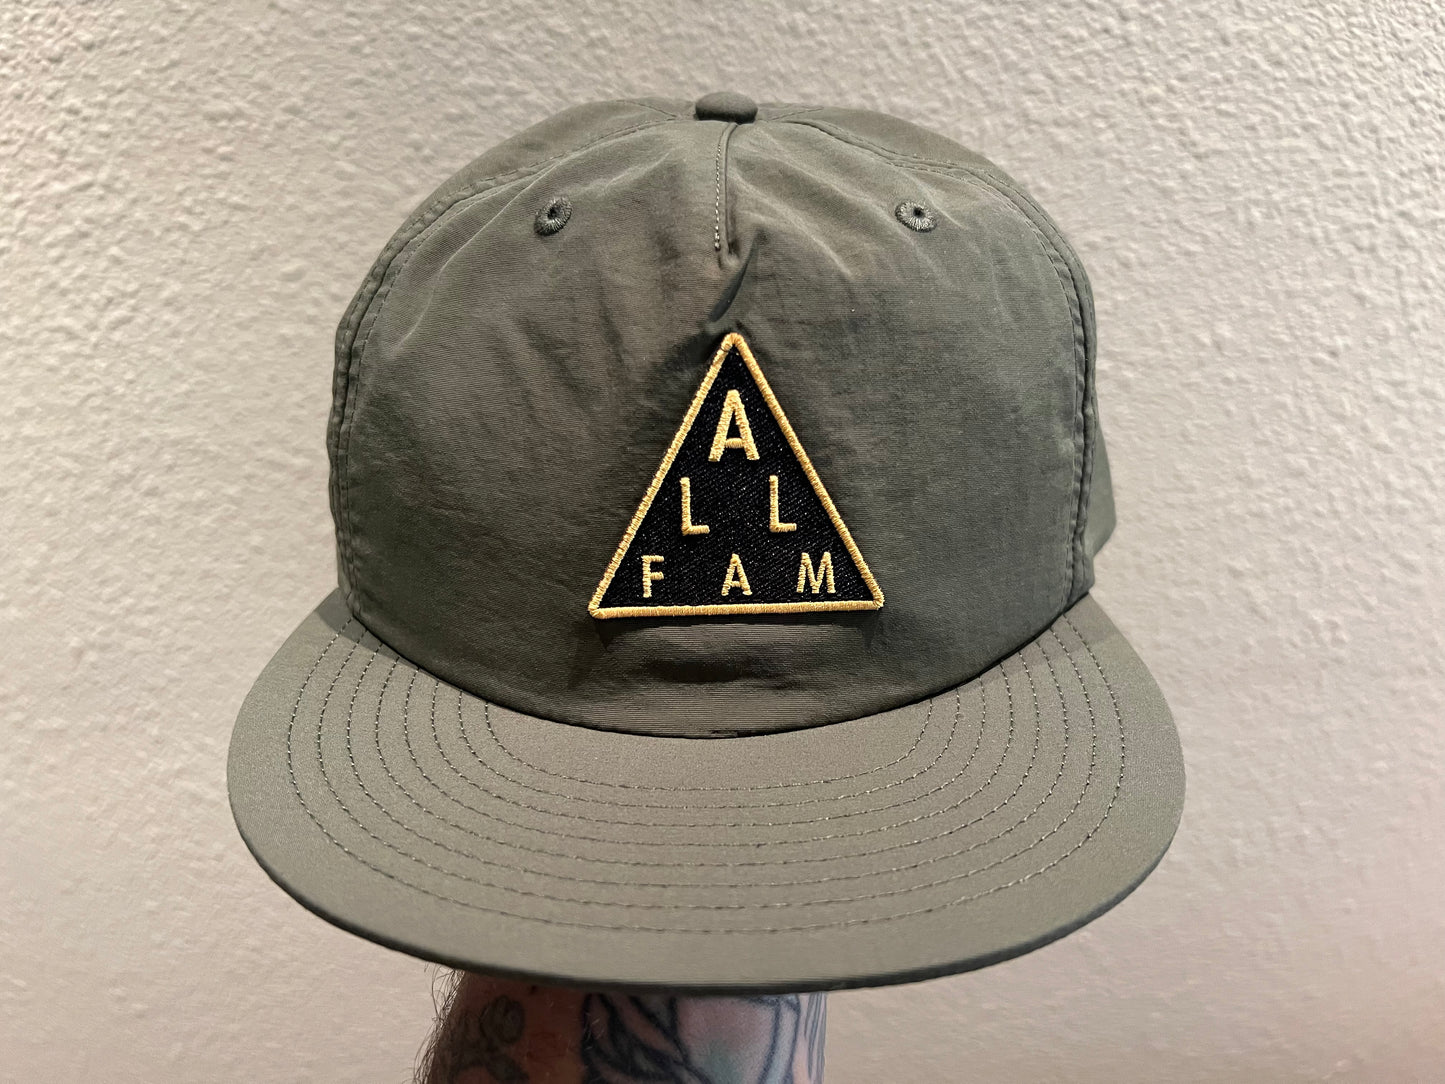 2" TRIANGLE PATCH SURF CAP ARMY